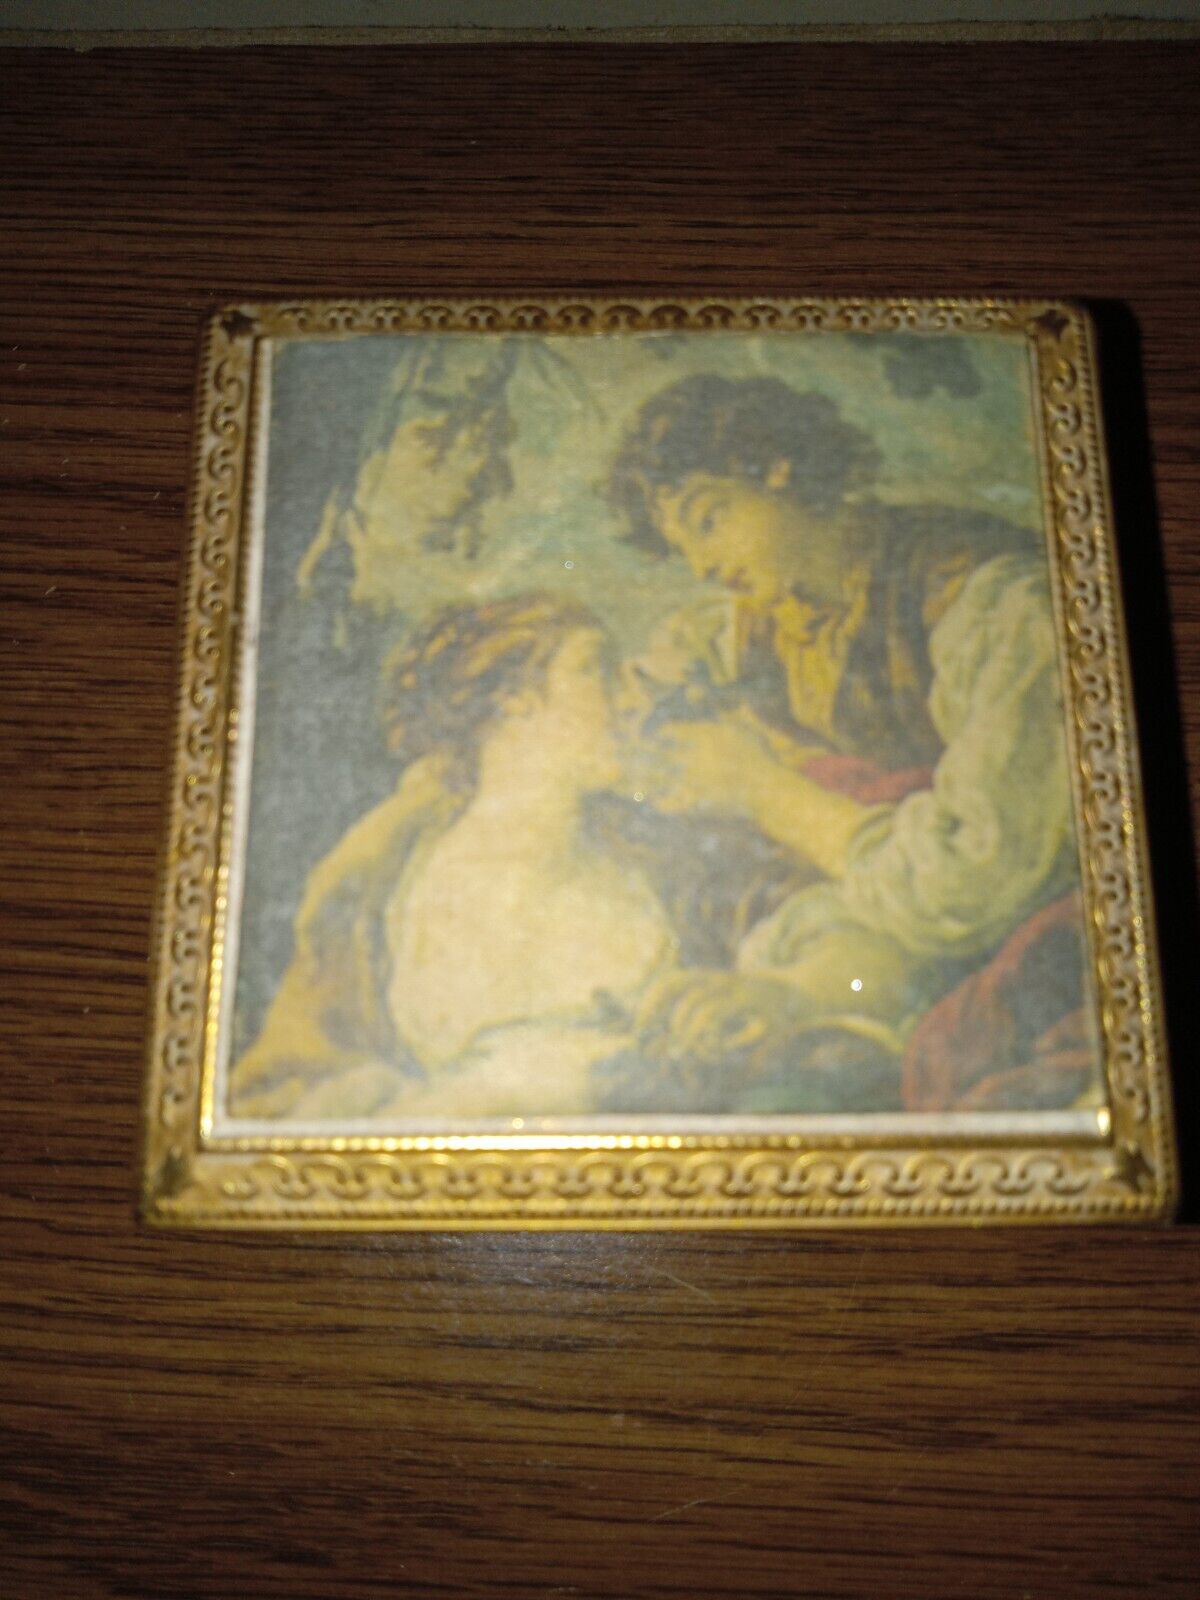 Vintage Music Trinket Box With Mirror From Japan 'La Cage' Francois Boucher 